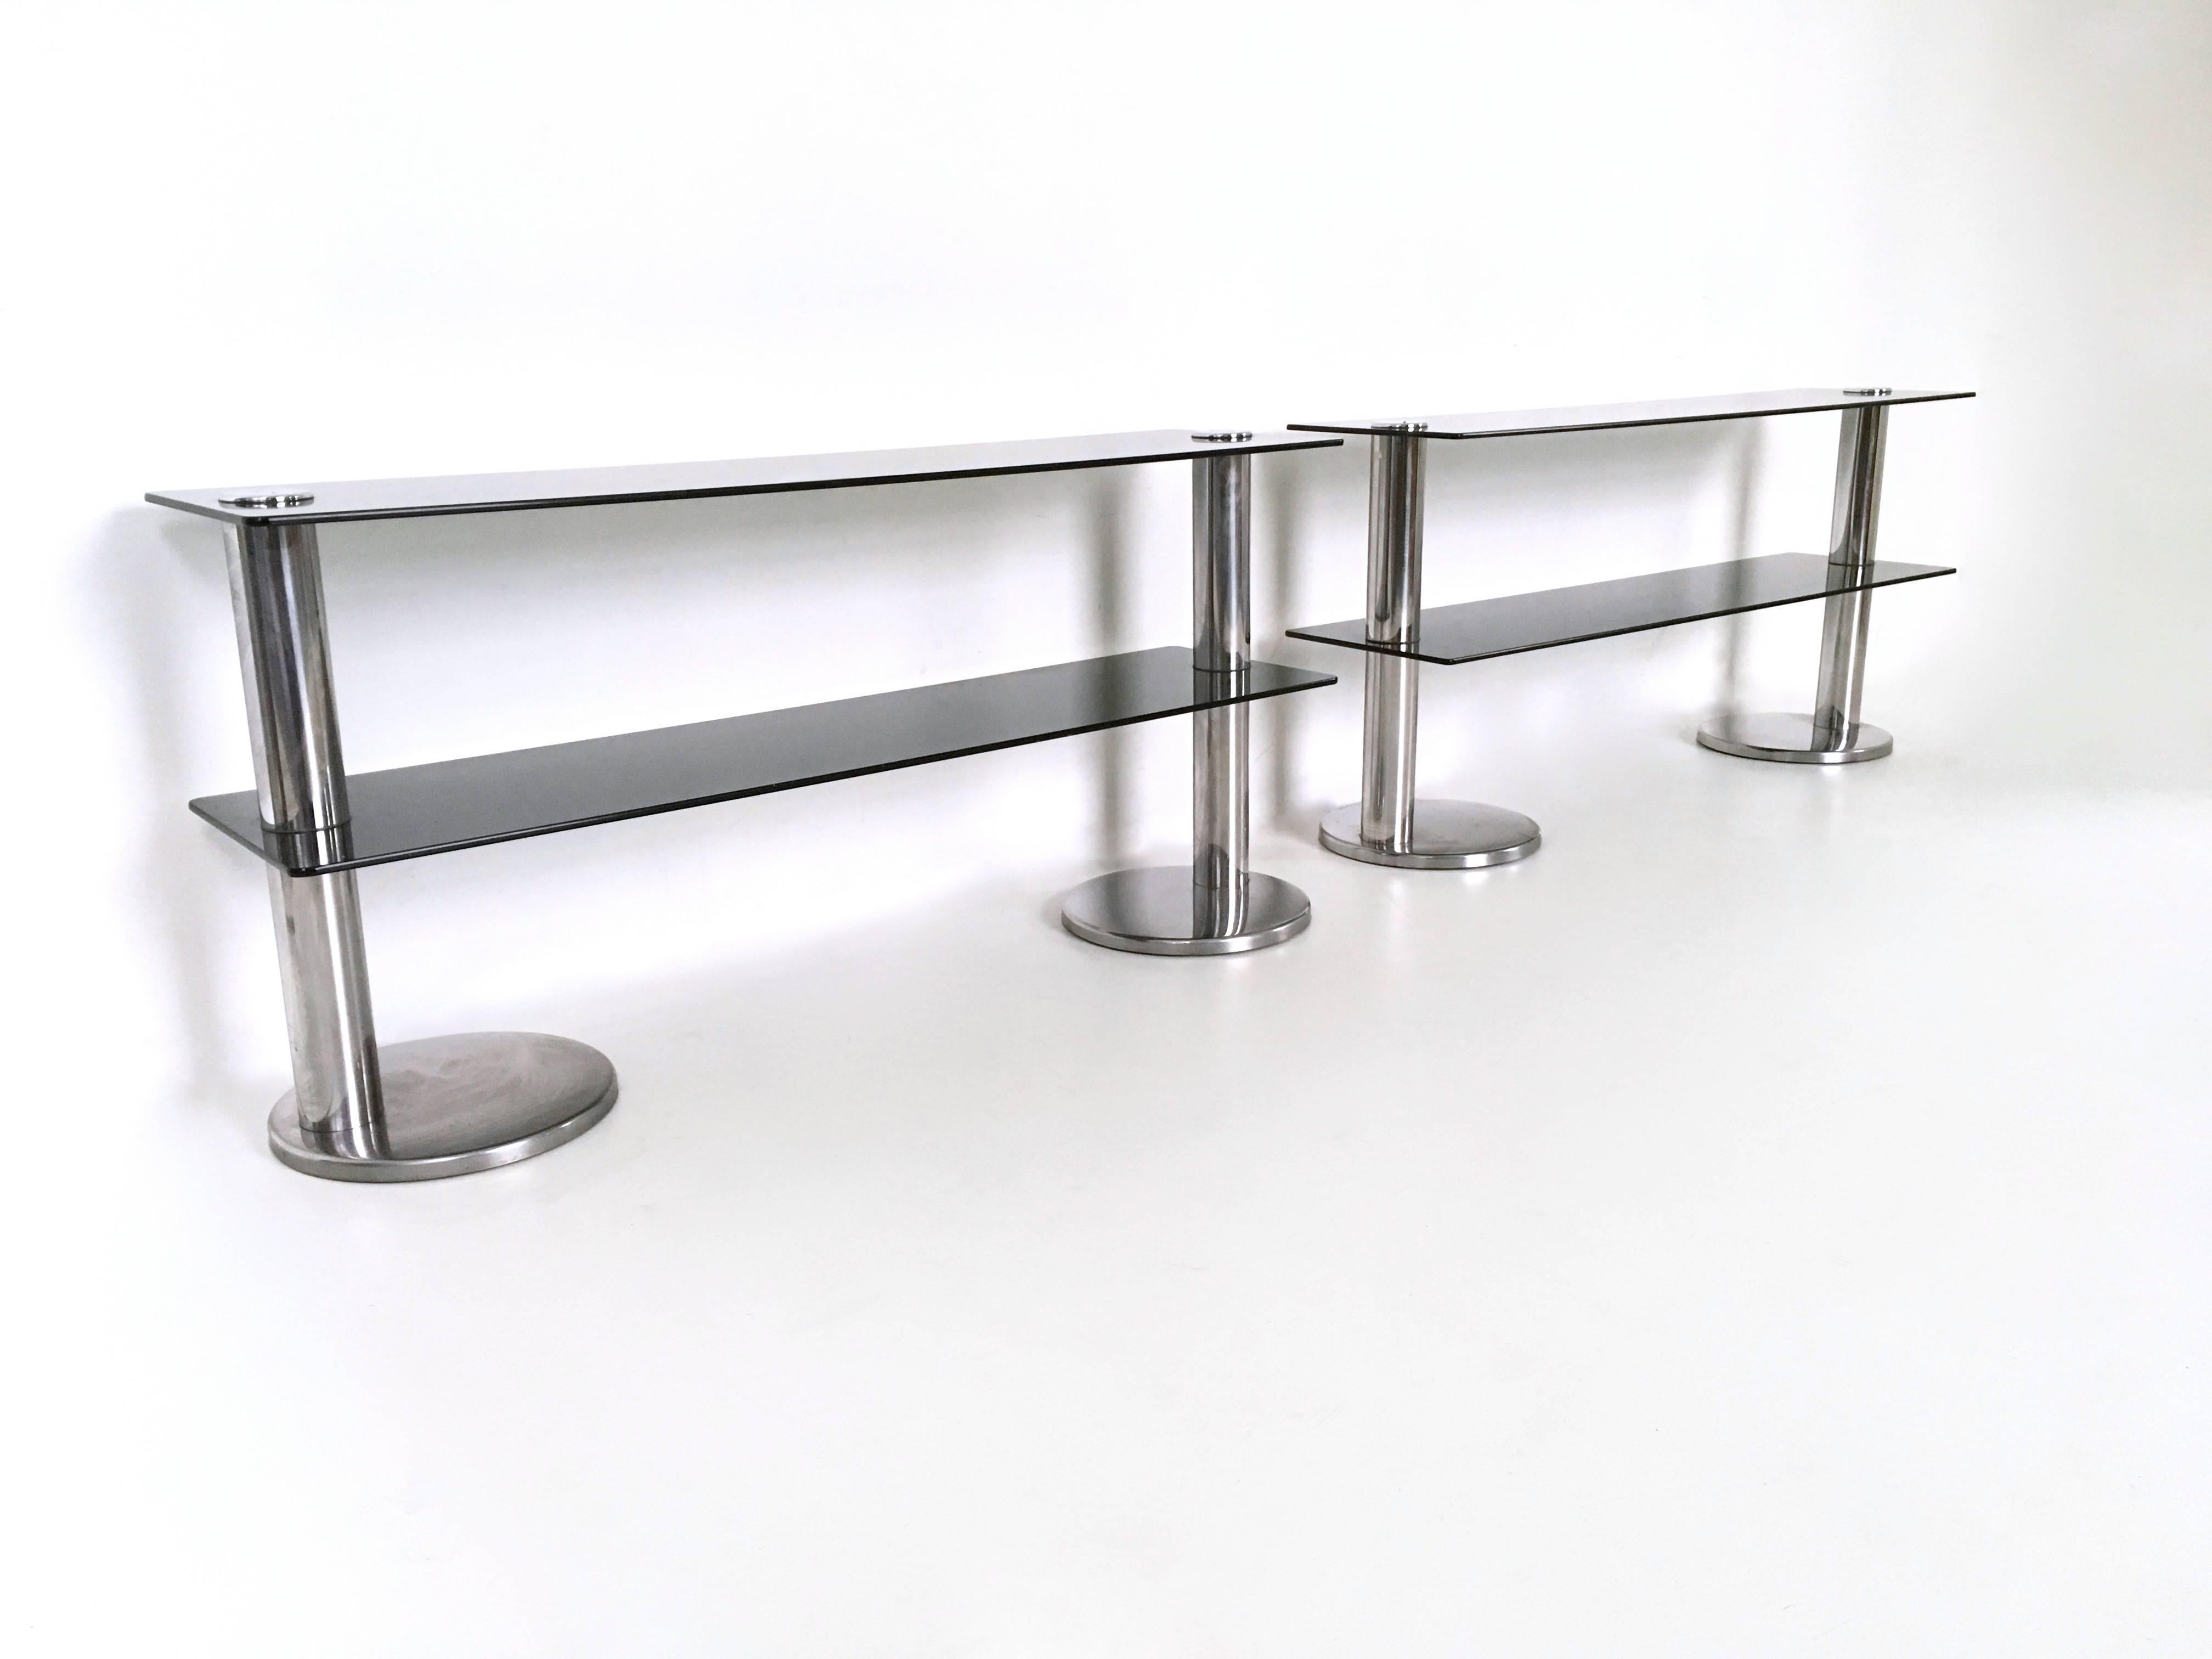 They feature a chromed metal frame and two glass shelves each.
They are vintage, therefore they might show slight traces of use but they can be considered as in very good original condition.

Measures: Width 150 cm
Depth 38 cm
Height 73 cm.